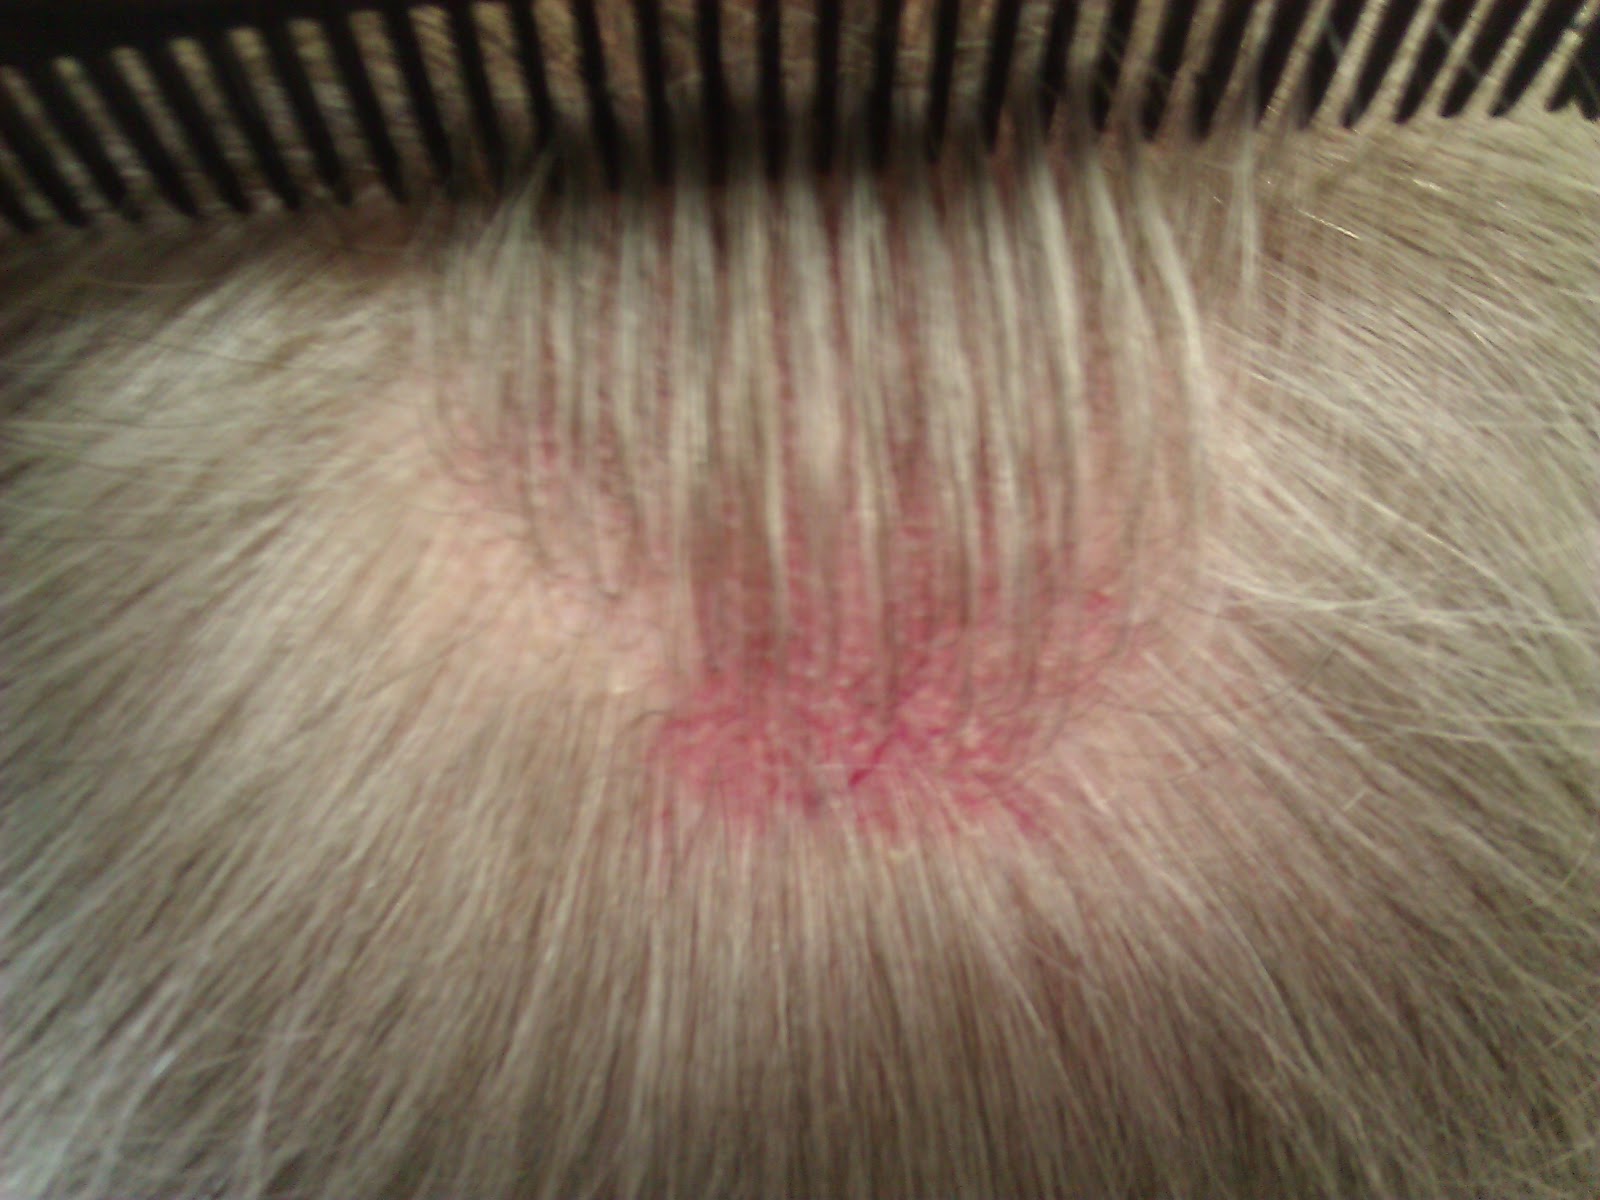 Sore Patch On My Head